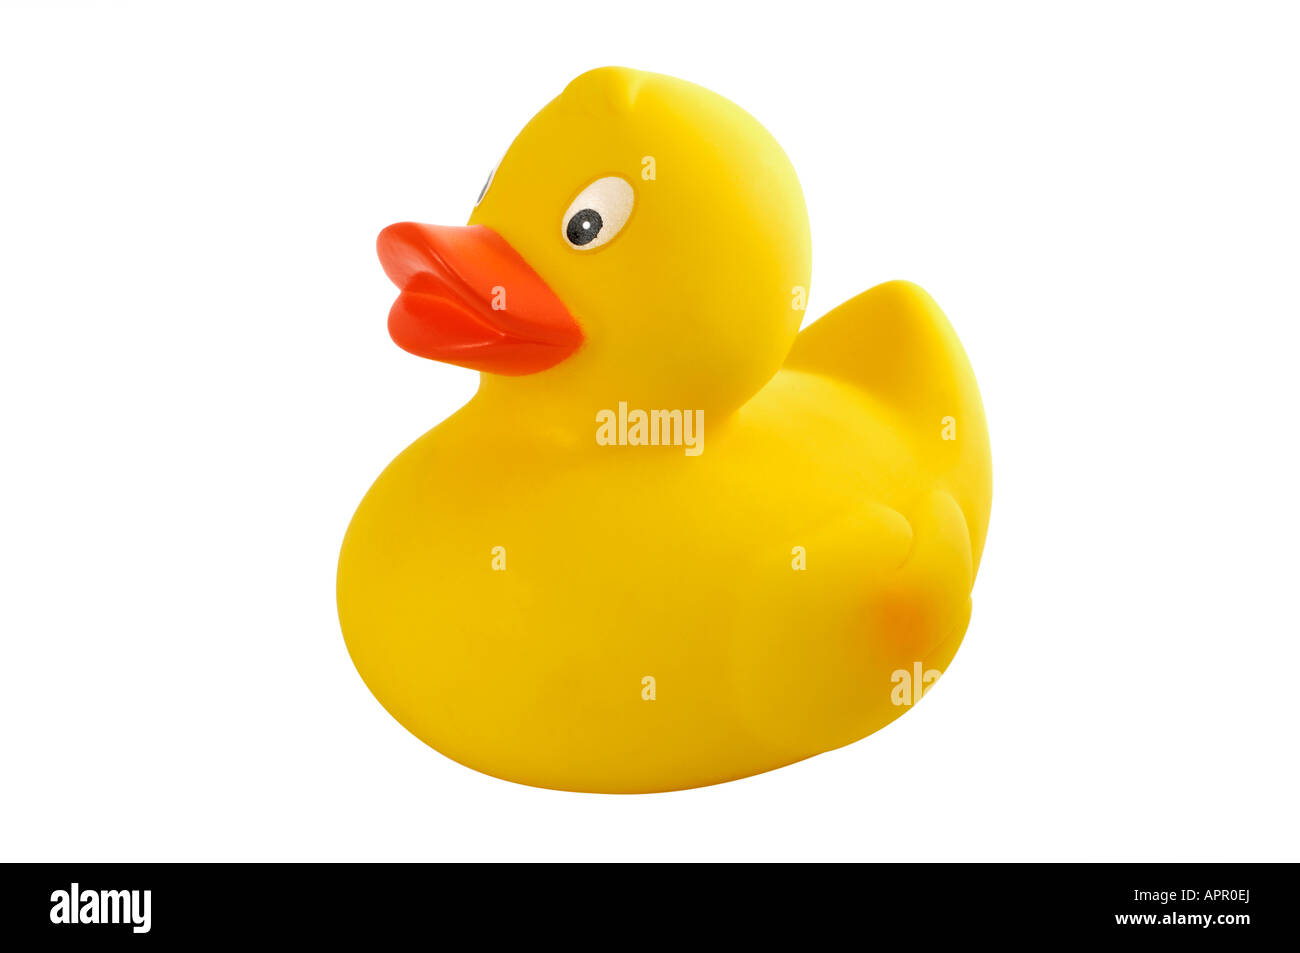 Rubber duck bath toy Stock Photo